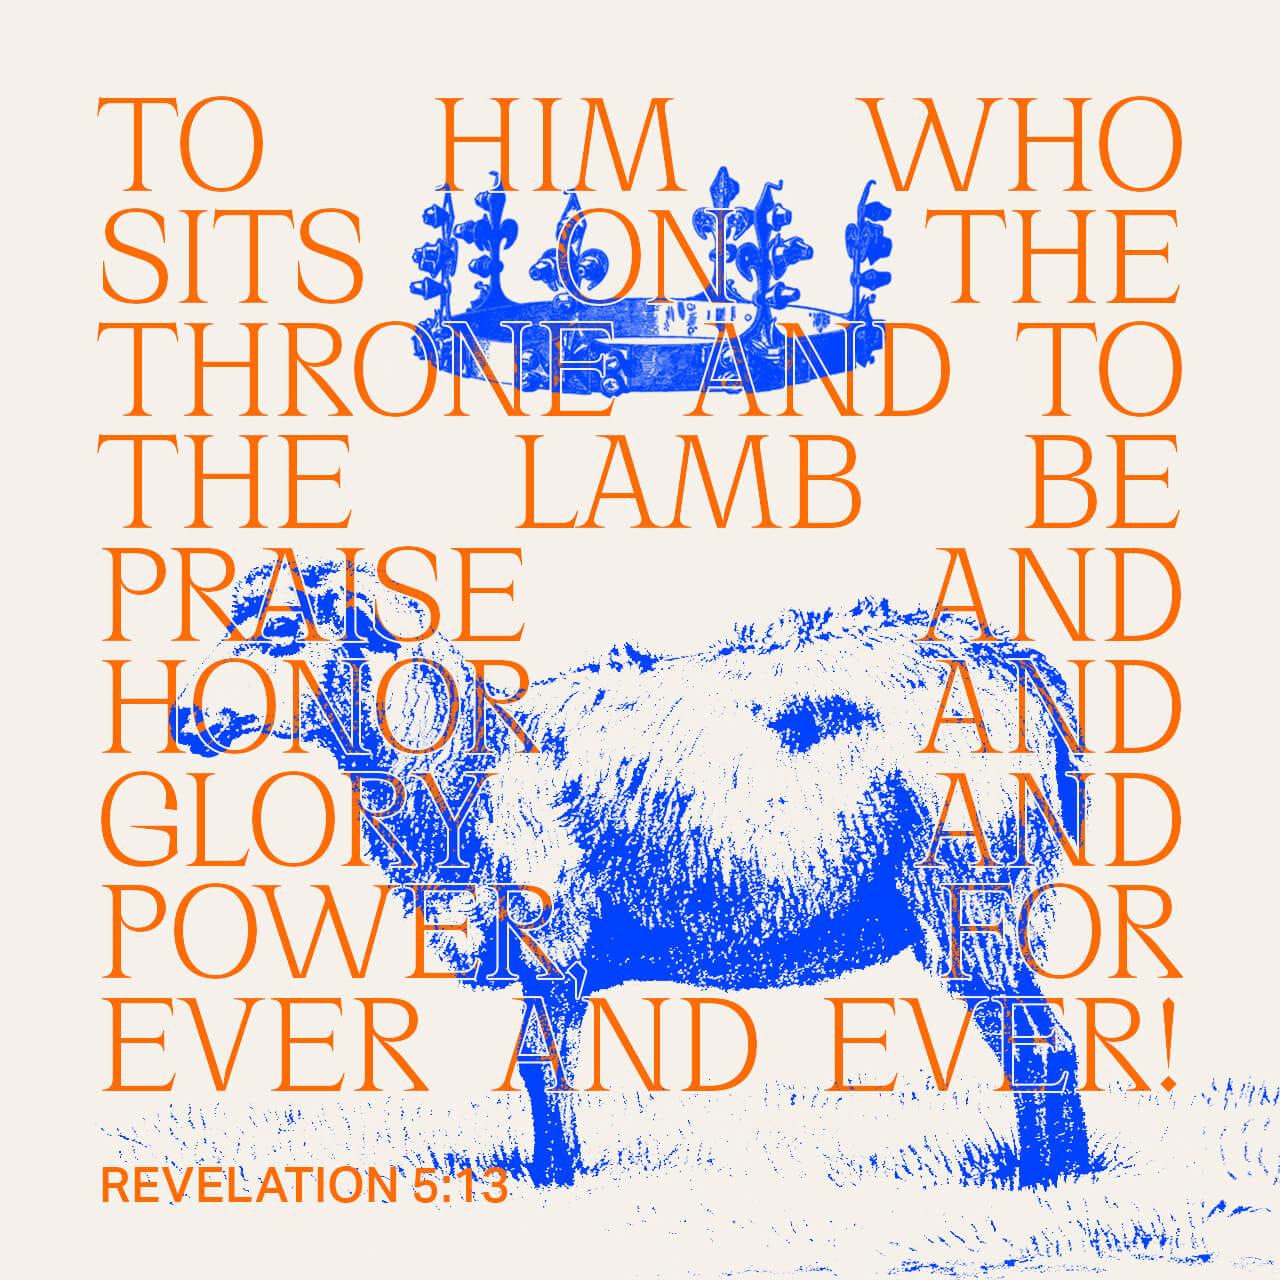 Bible Verse of the Day - day 86 - image 77329 (Revelation 5:1-14)